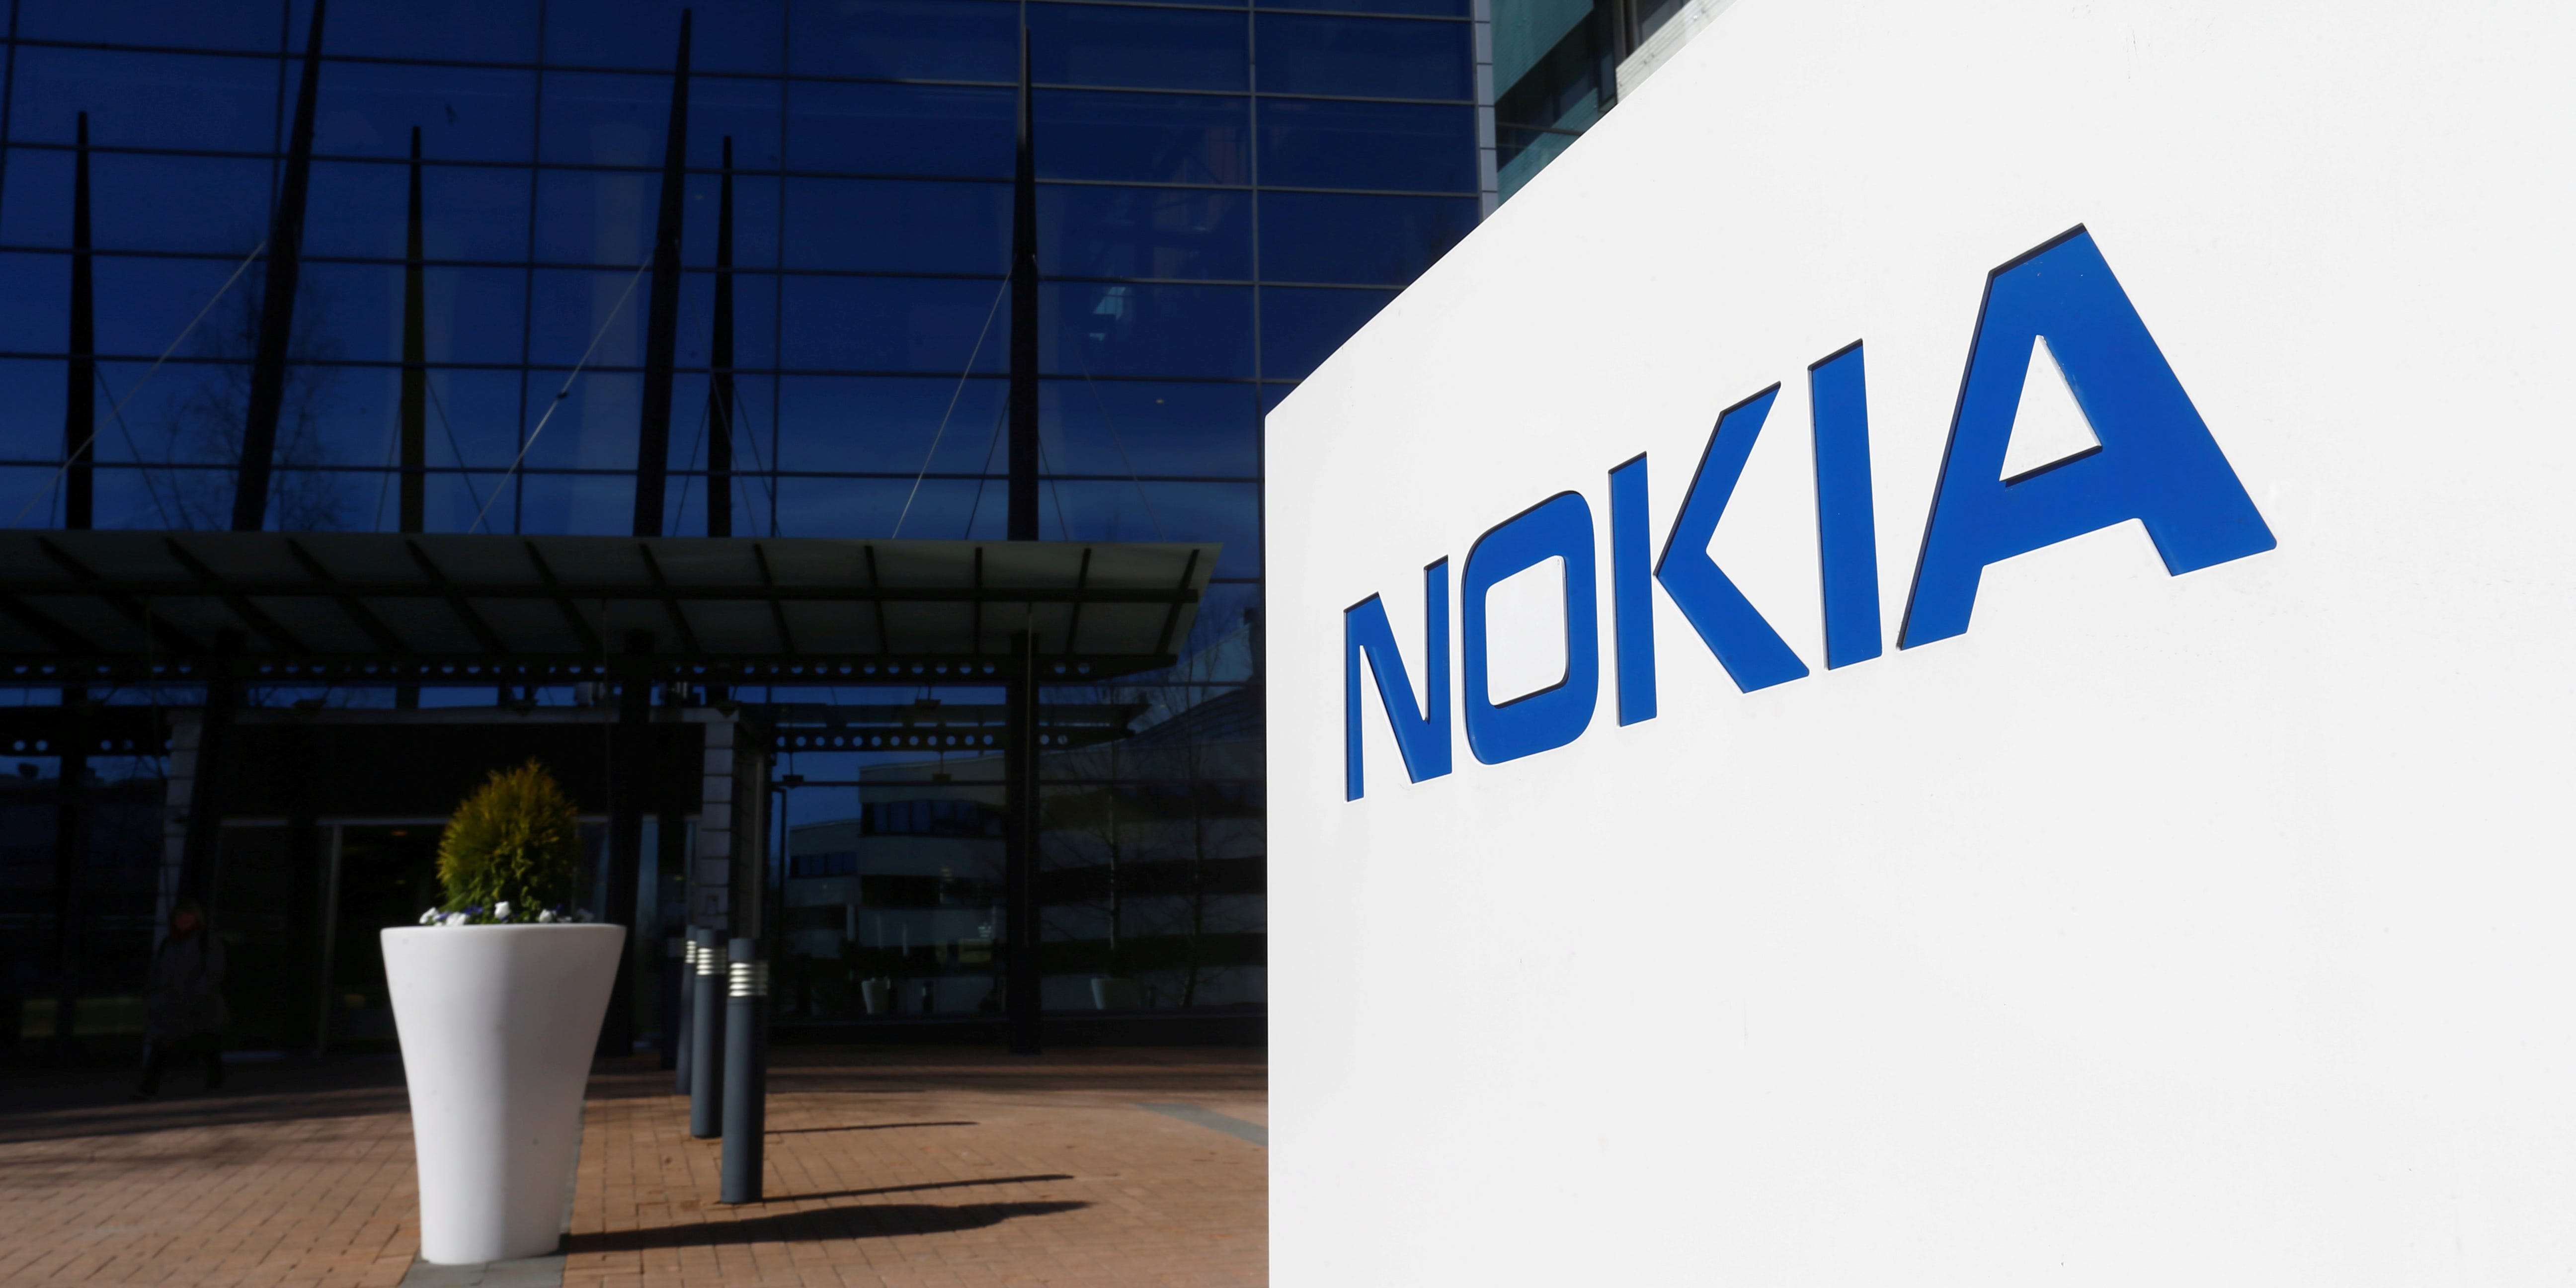 Nokia sinks 9 on 'challenging' 2021 outlook despite 4thquarter